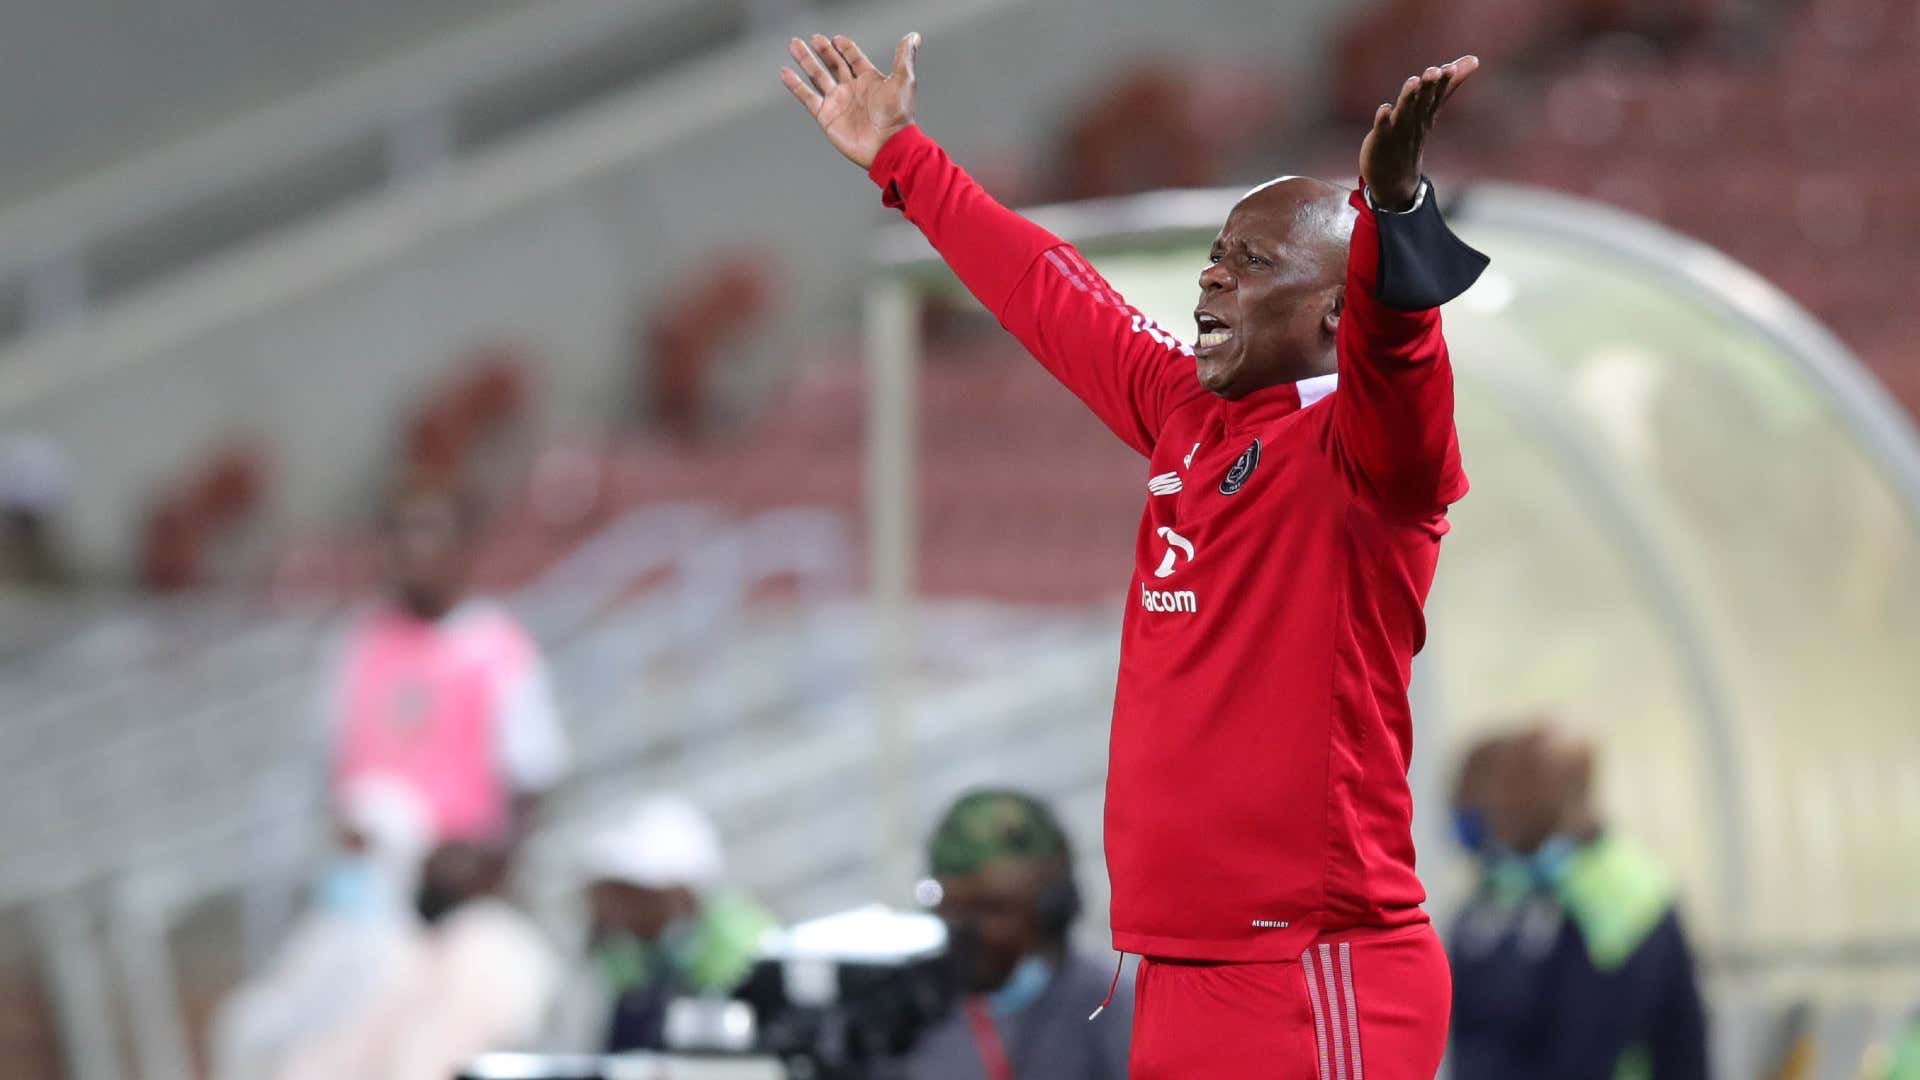 Caf Confederation Cup: Orlando Pirates’ Ncikazi after triumph over Al Ahli Tripoli - ‘We could have done it better’